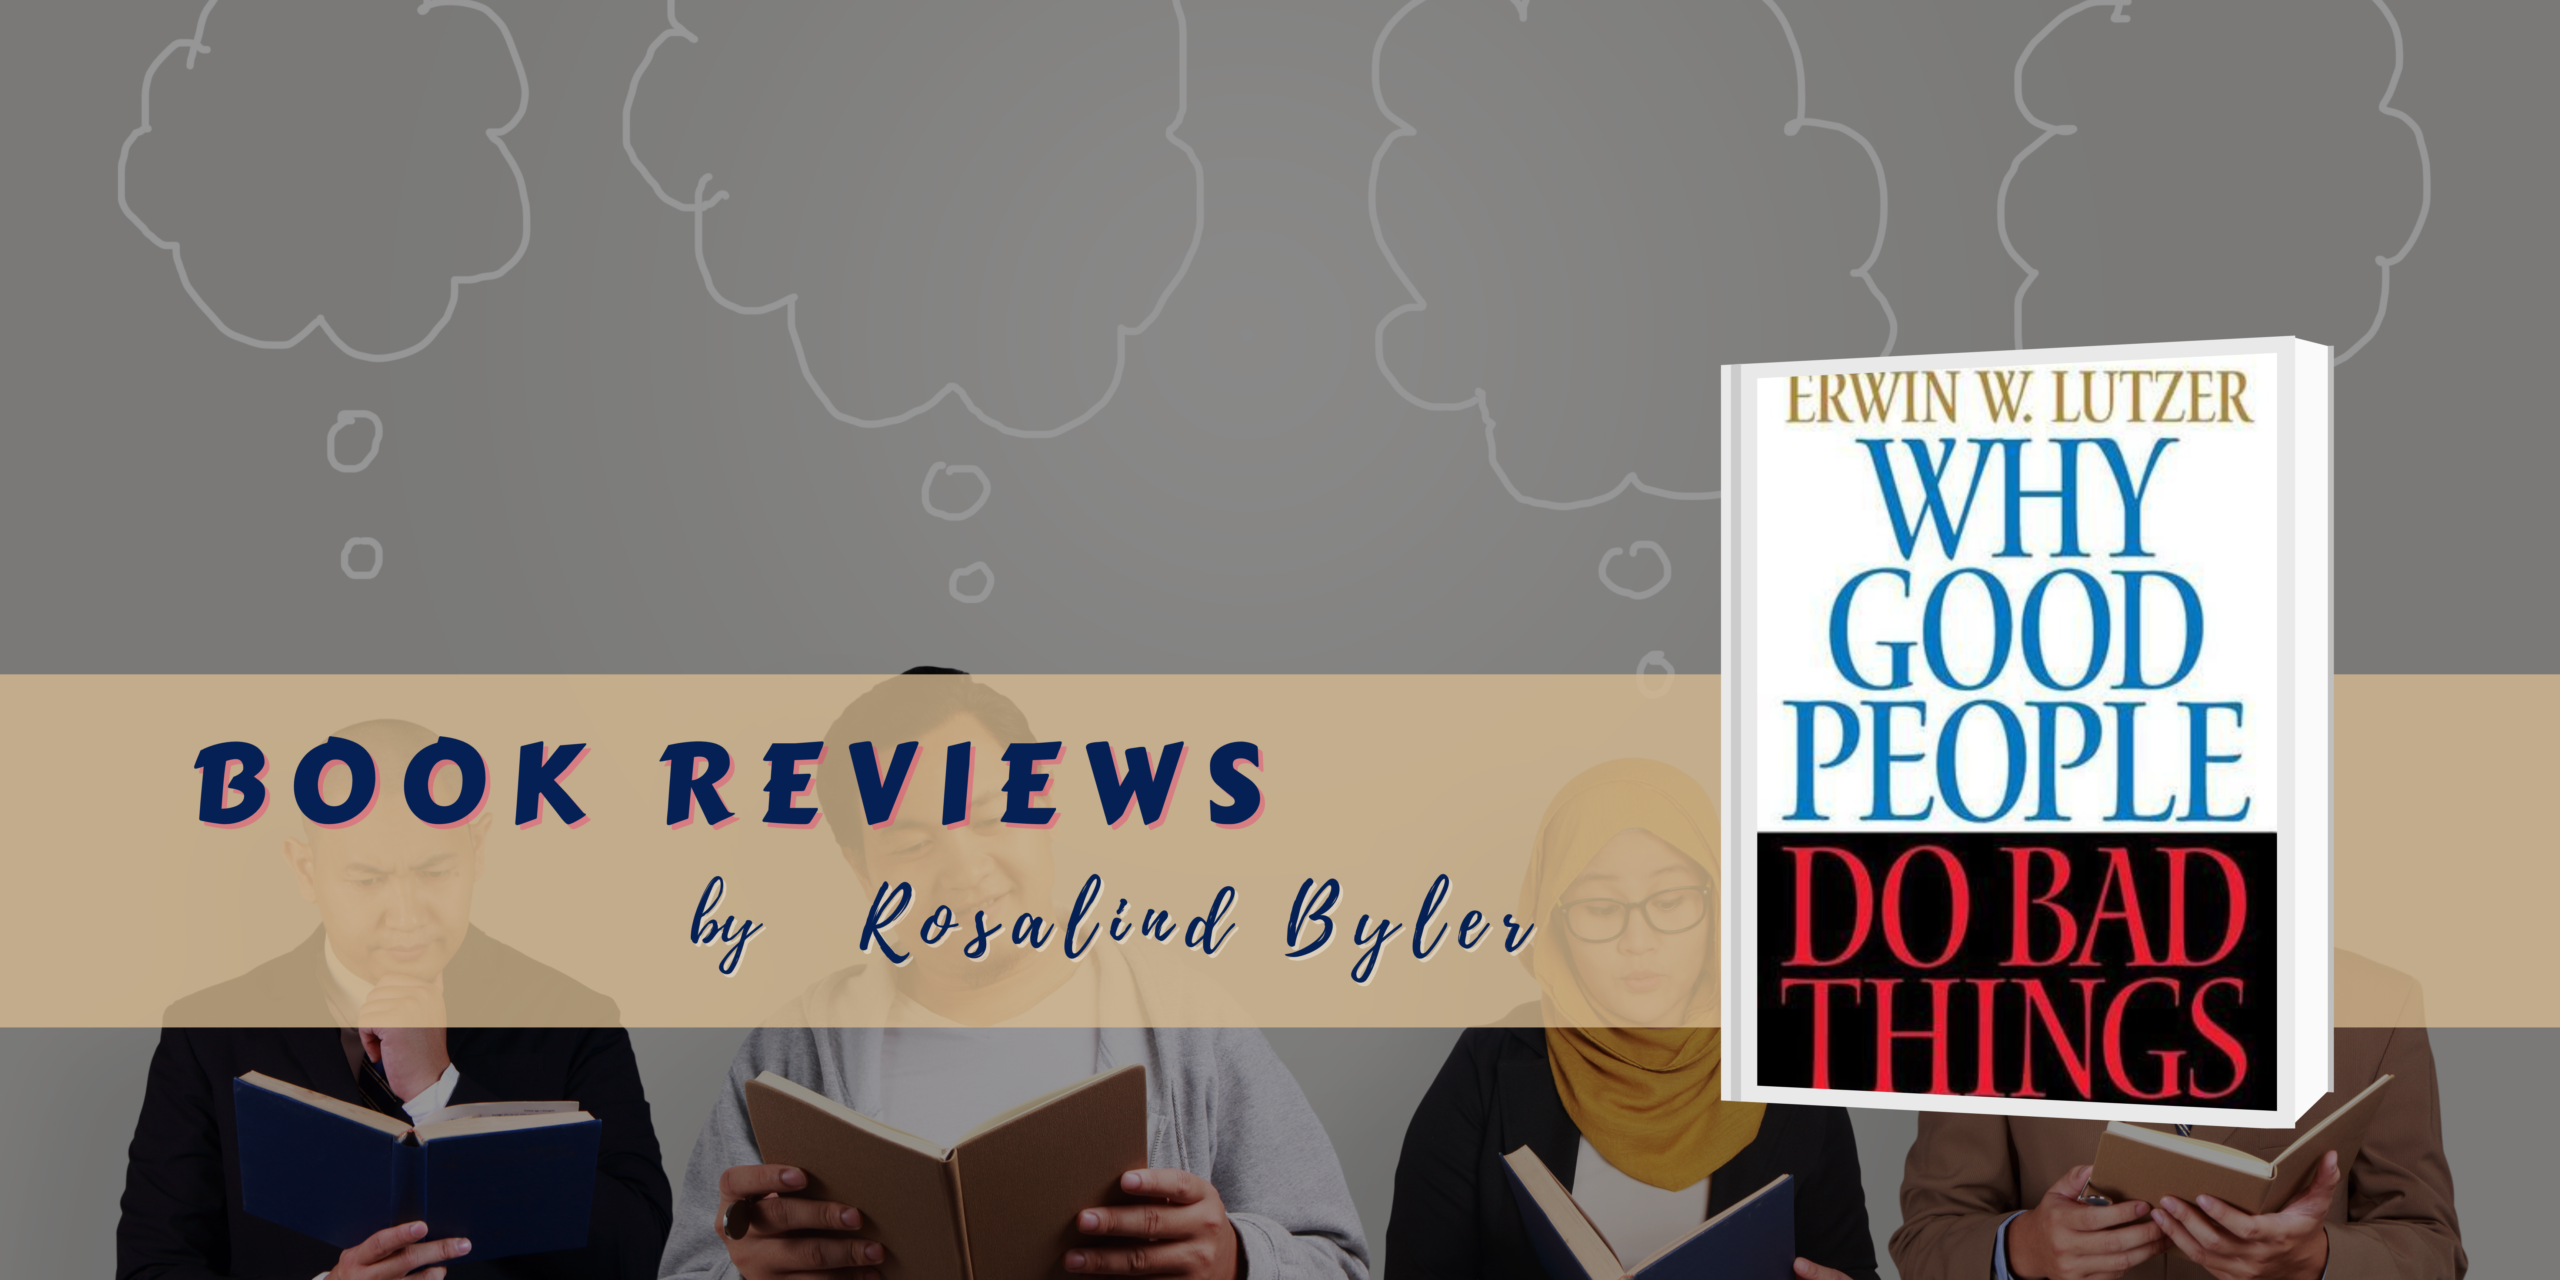 Why Good People Do Bad Things, by Erwin W. Lutzer book review